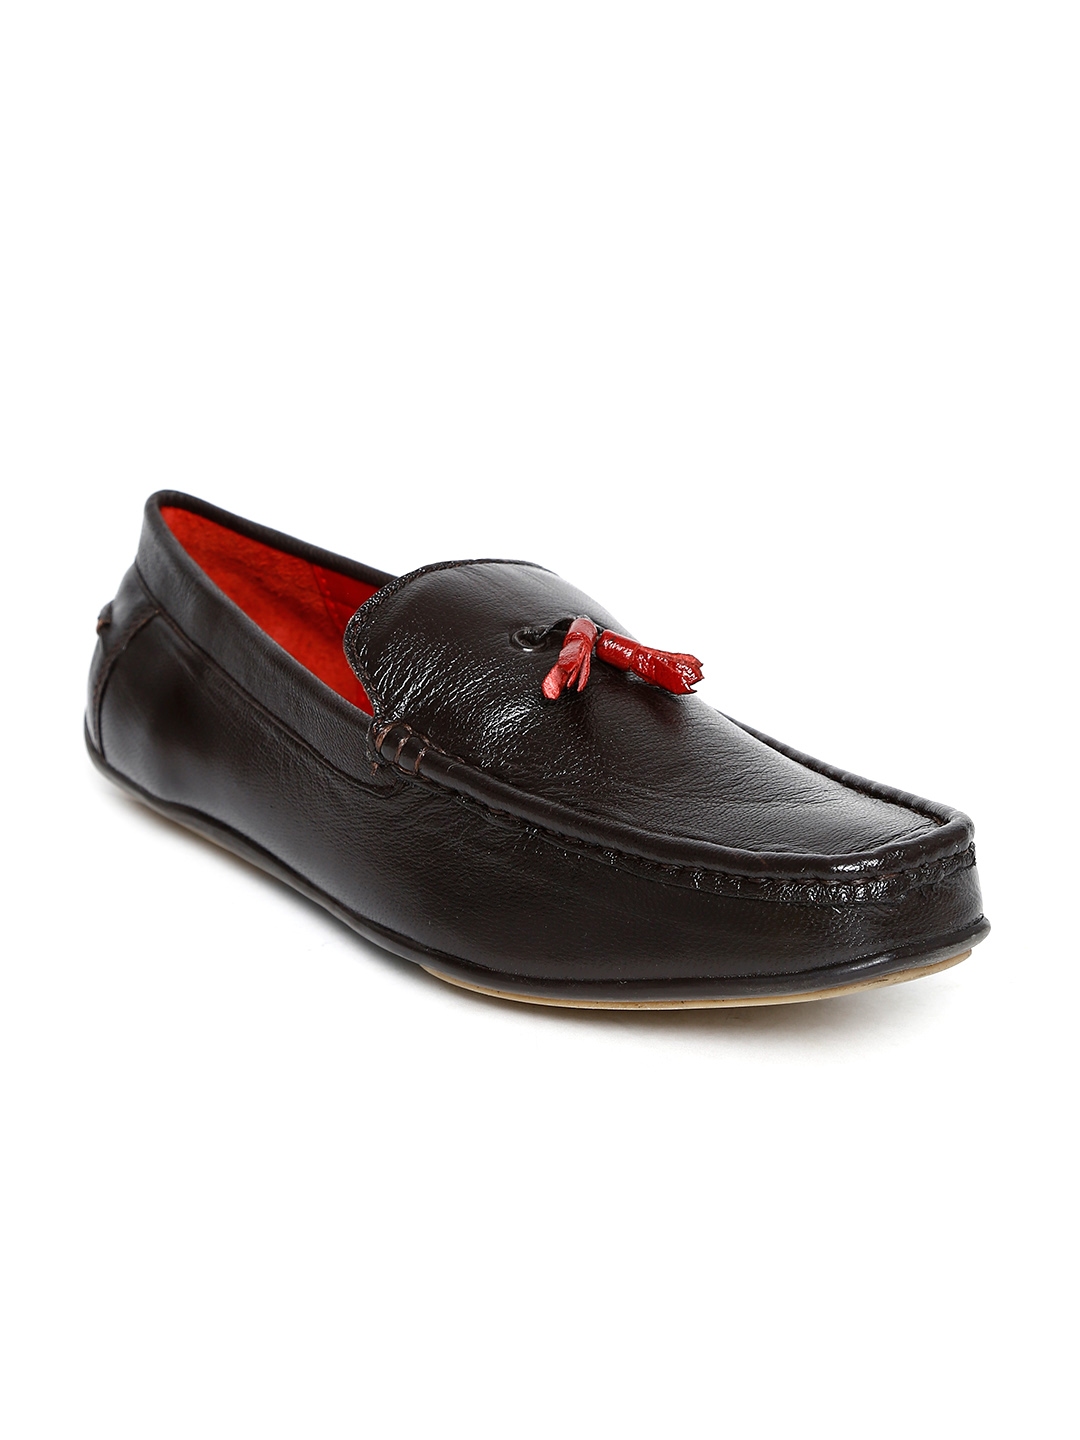 bata penny loafers